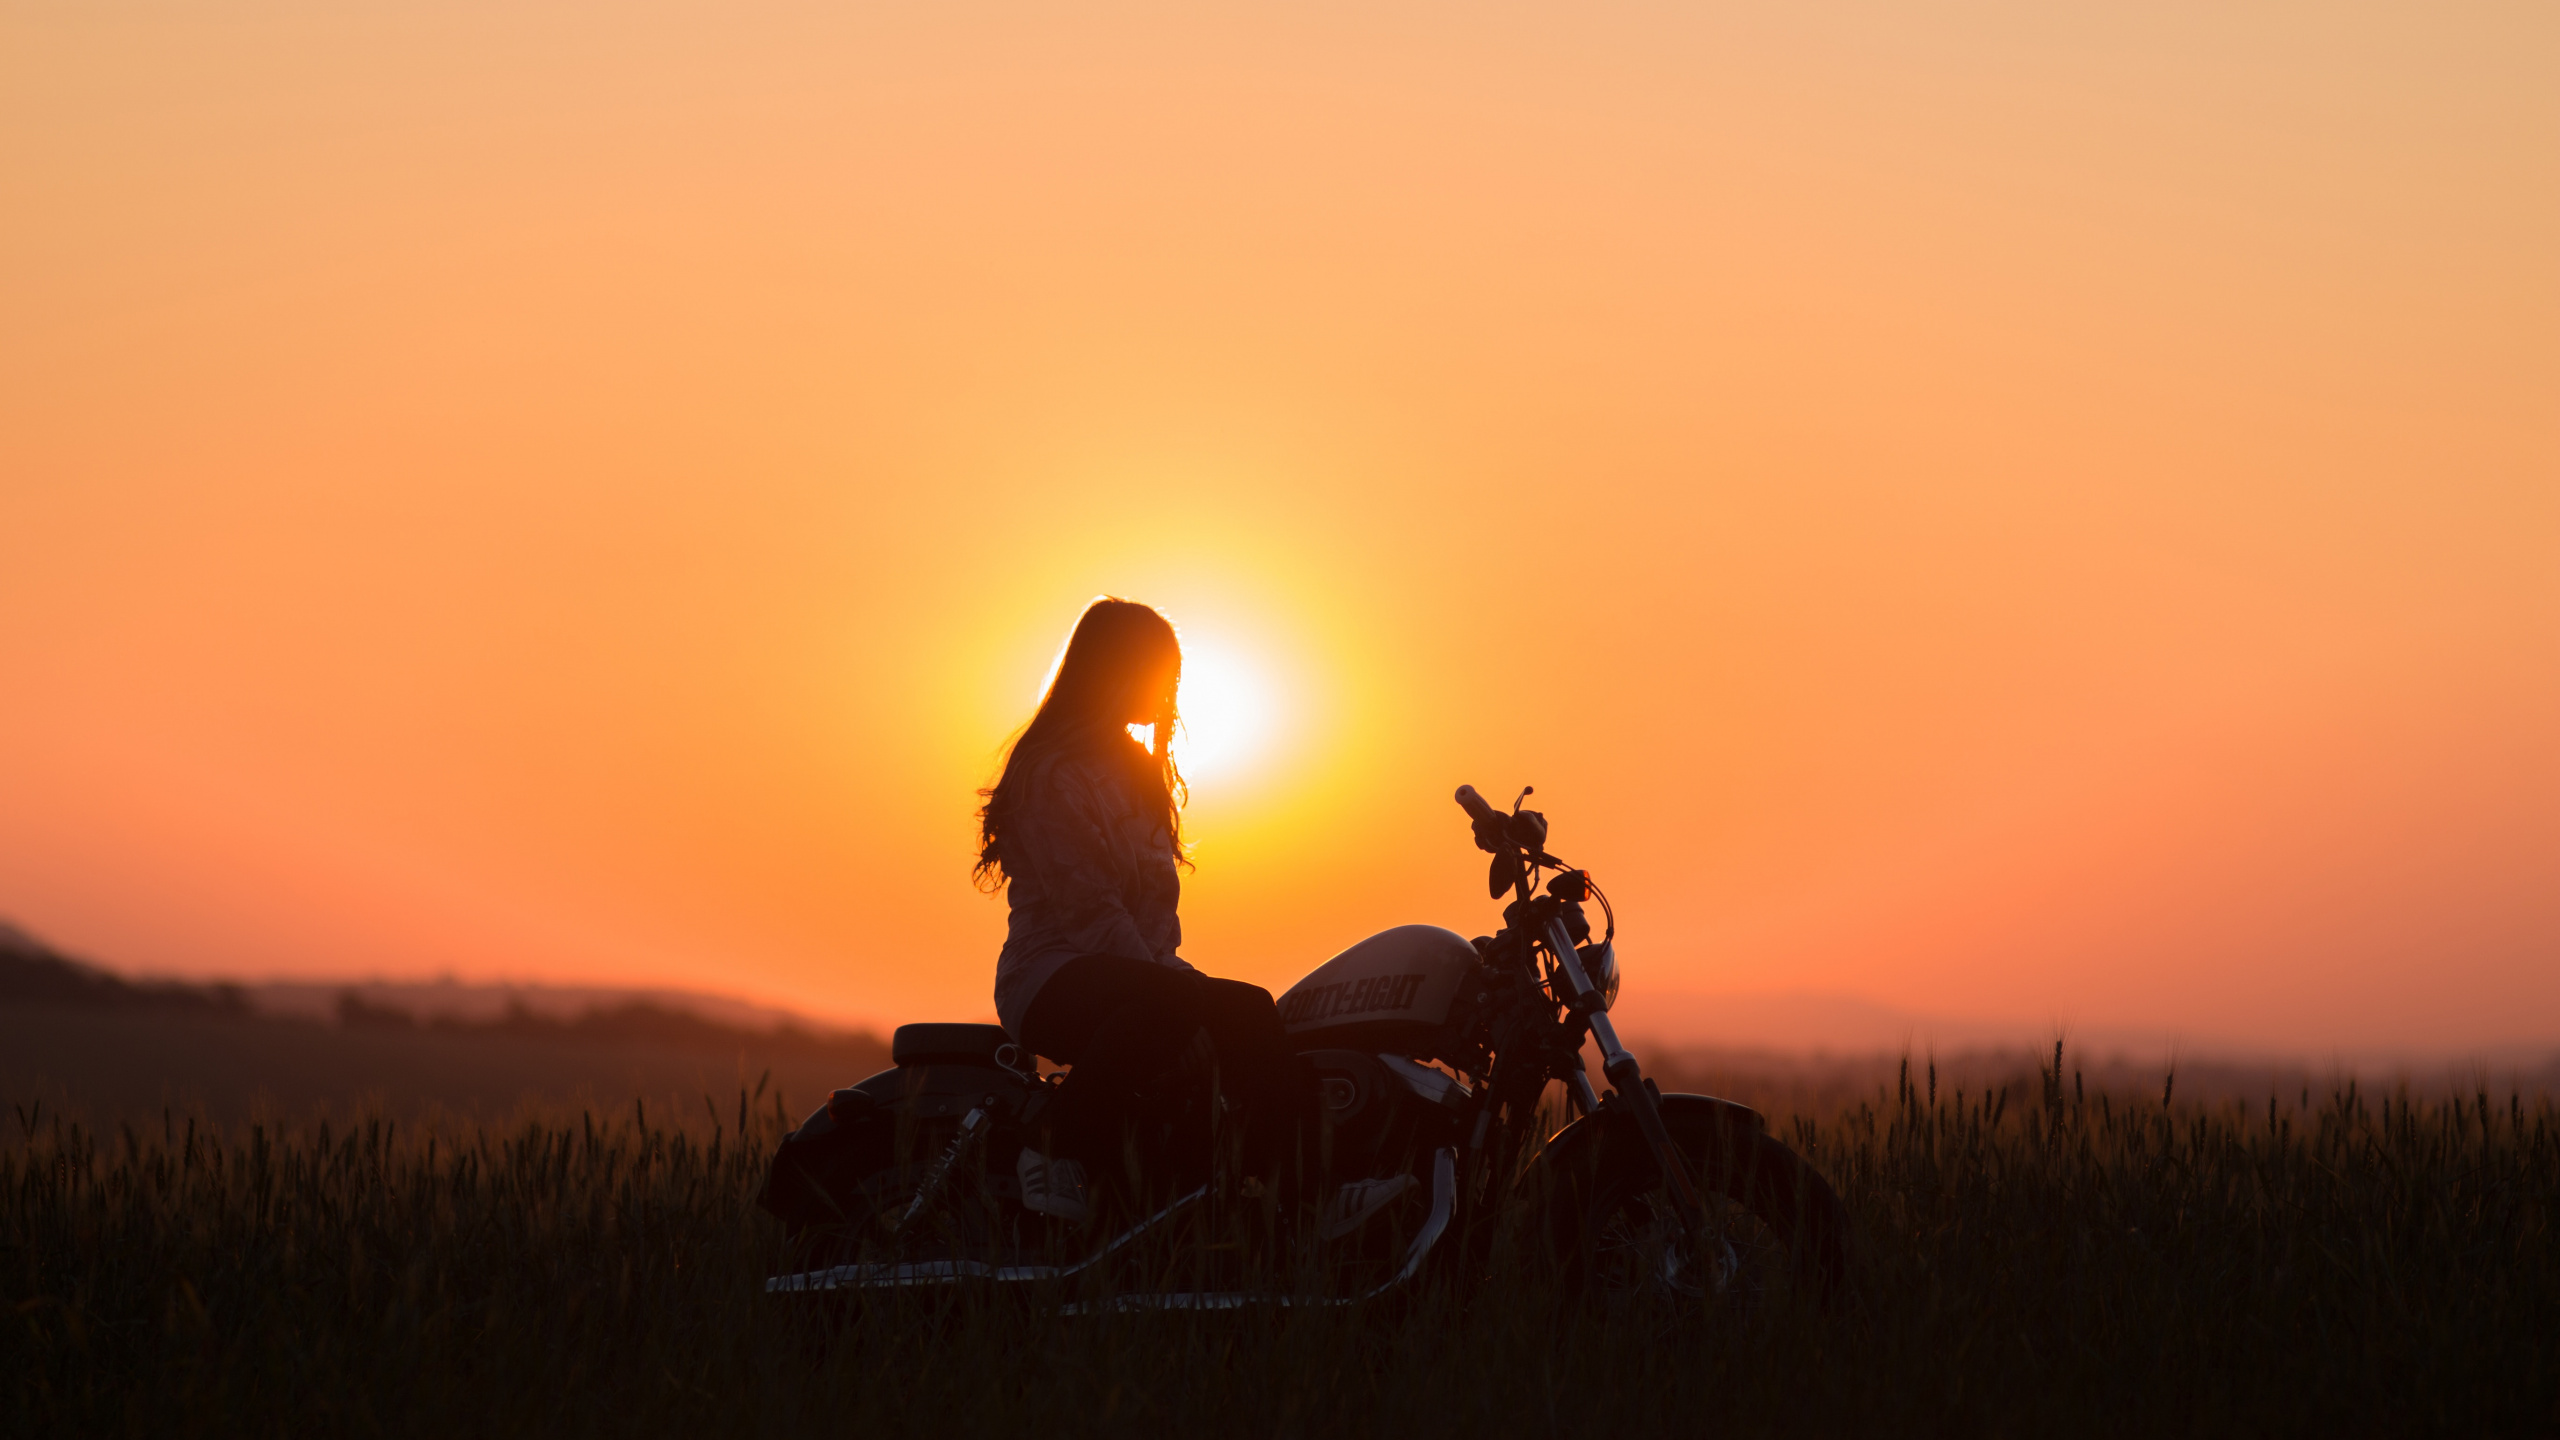 Silhouette of Man Riding Motorcycle During Sunset. Wallpaper in 2560x1440 Resolution